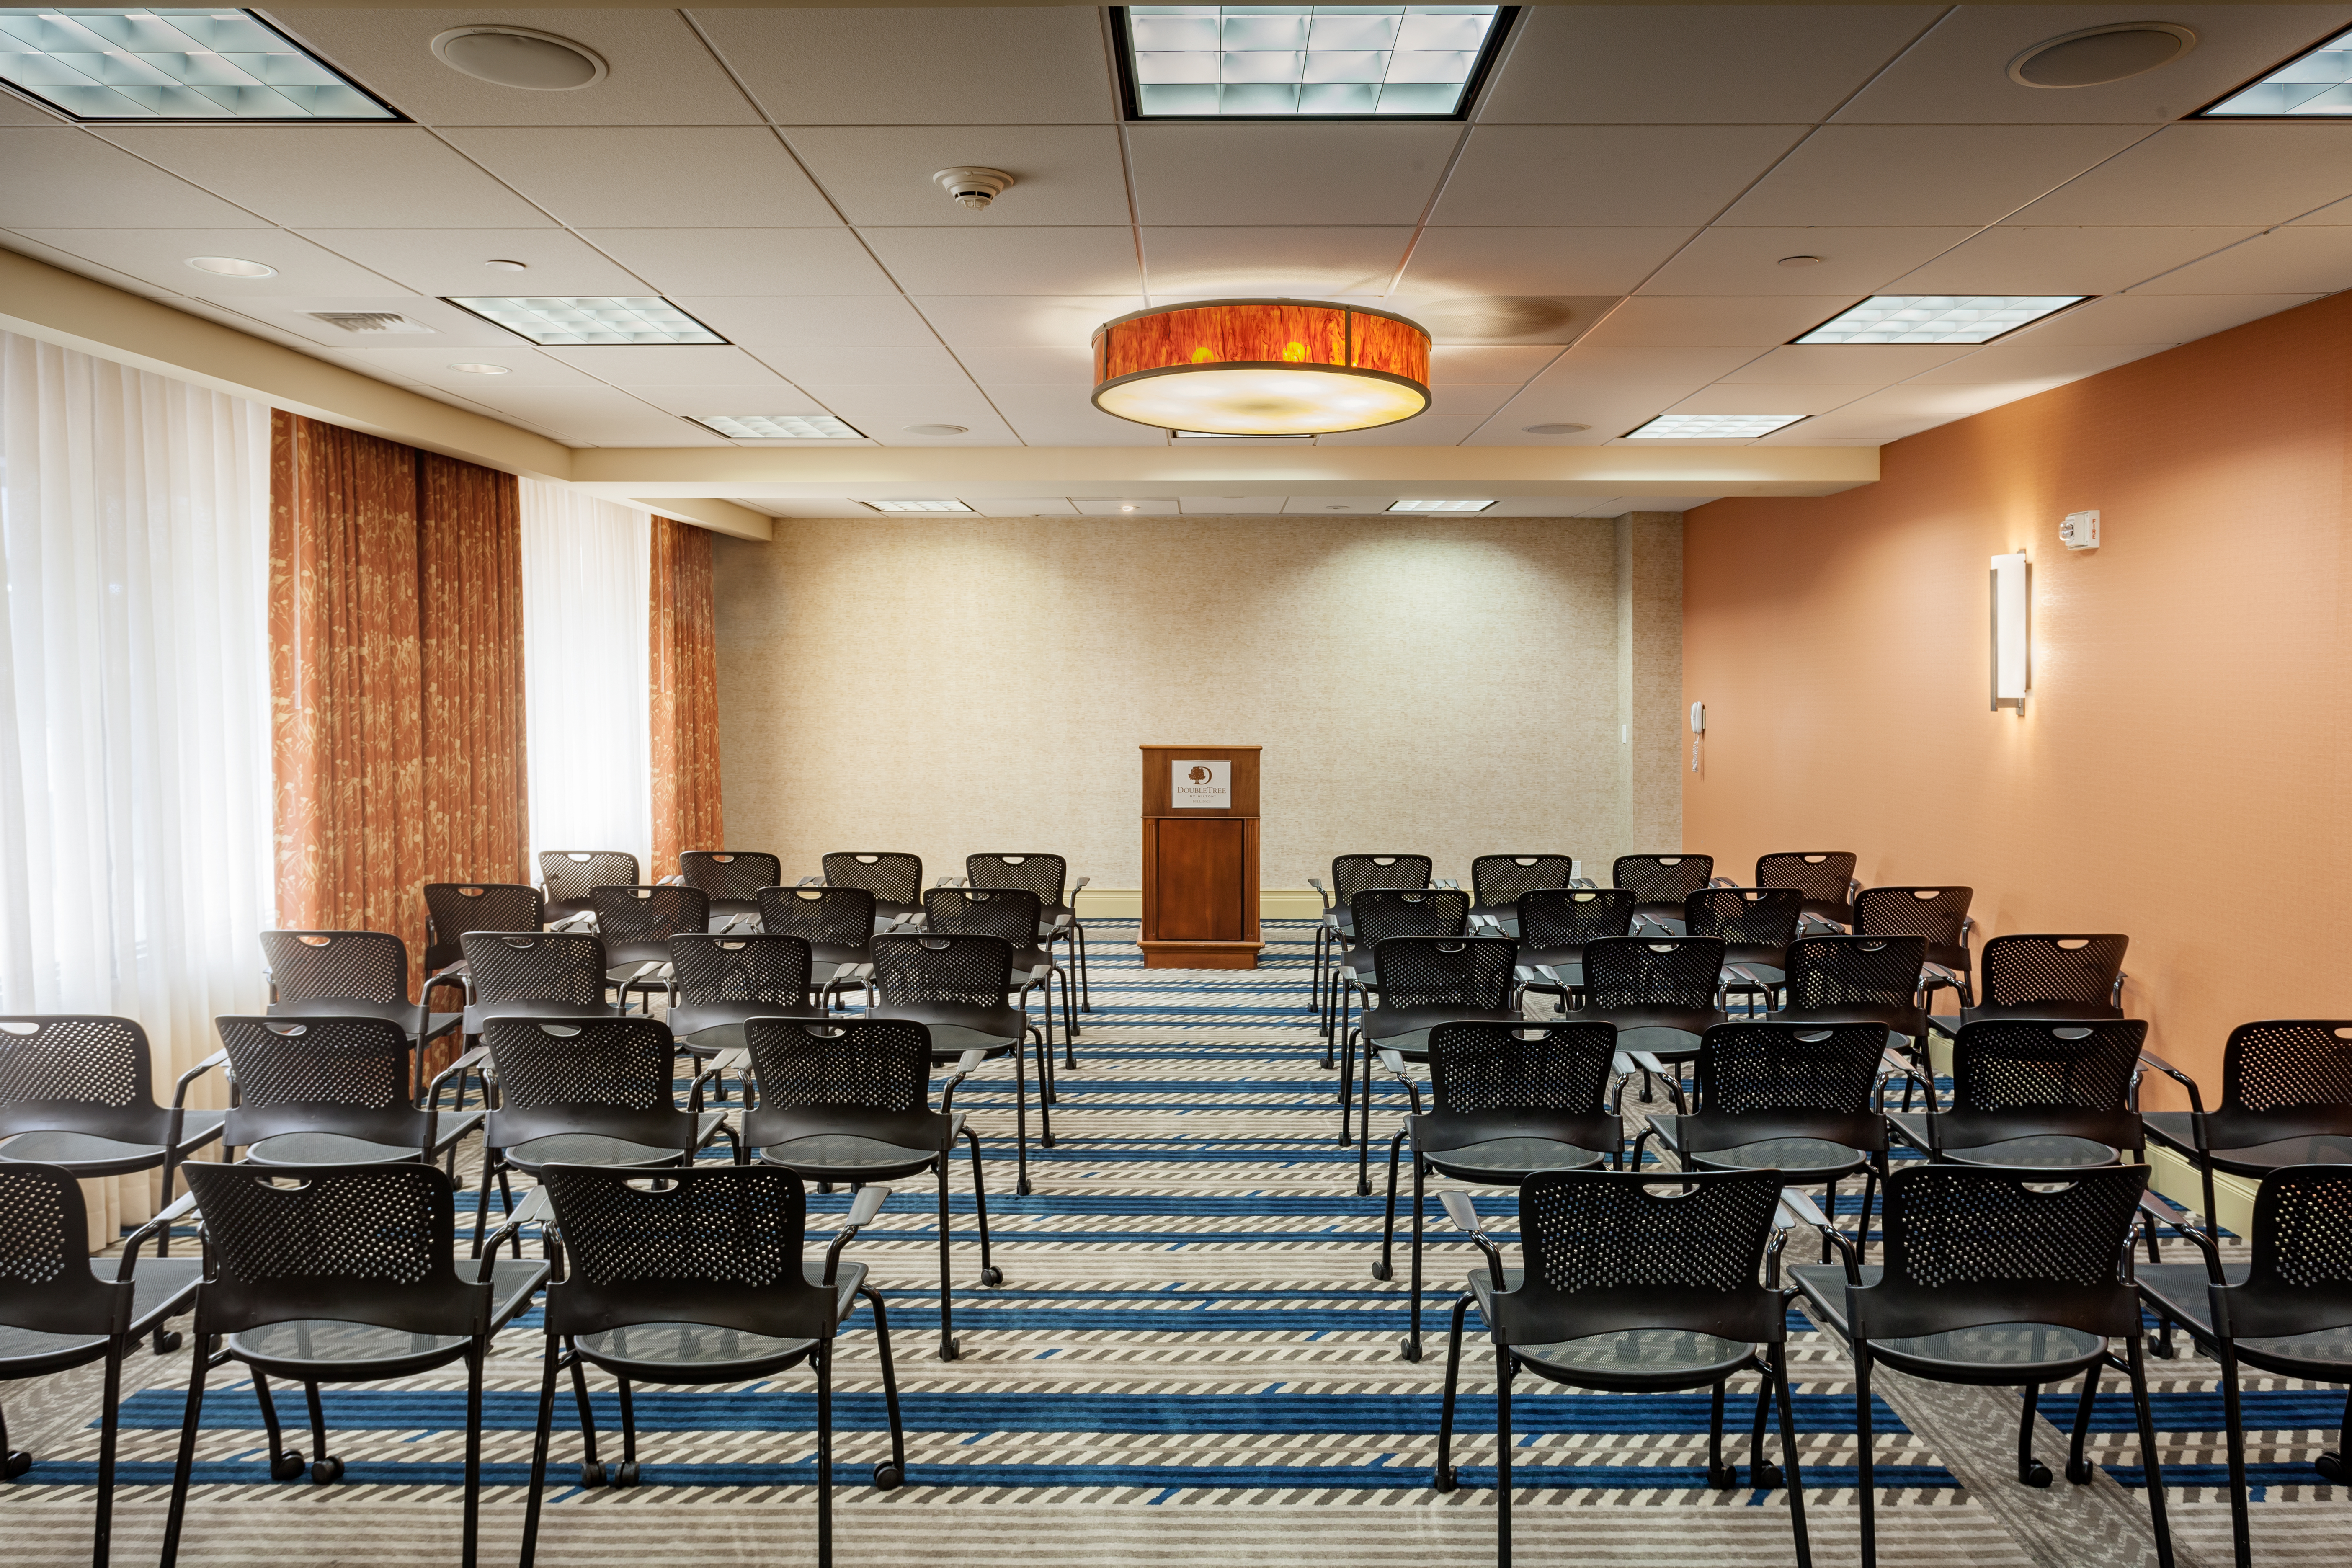 Meeting Room Set Up Theater Style With Rows of Black Chairs Facing Podium